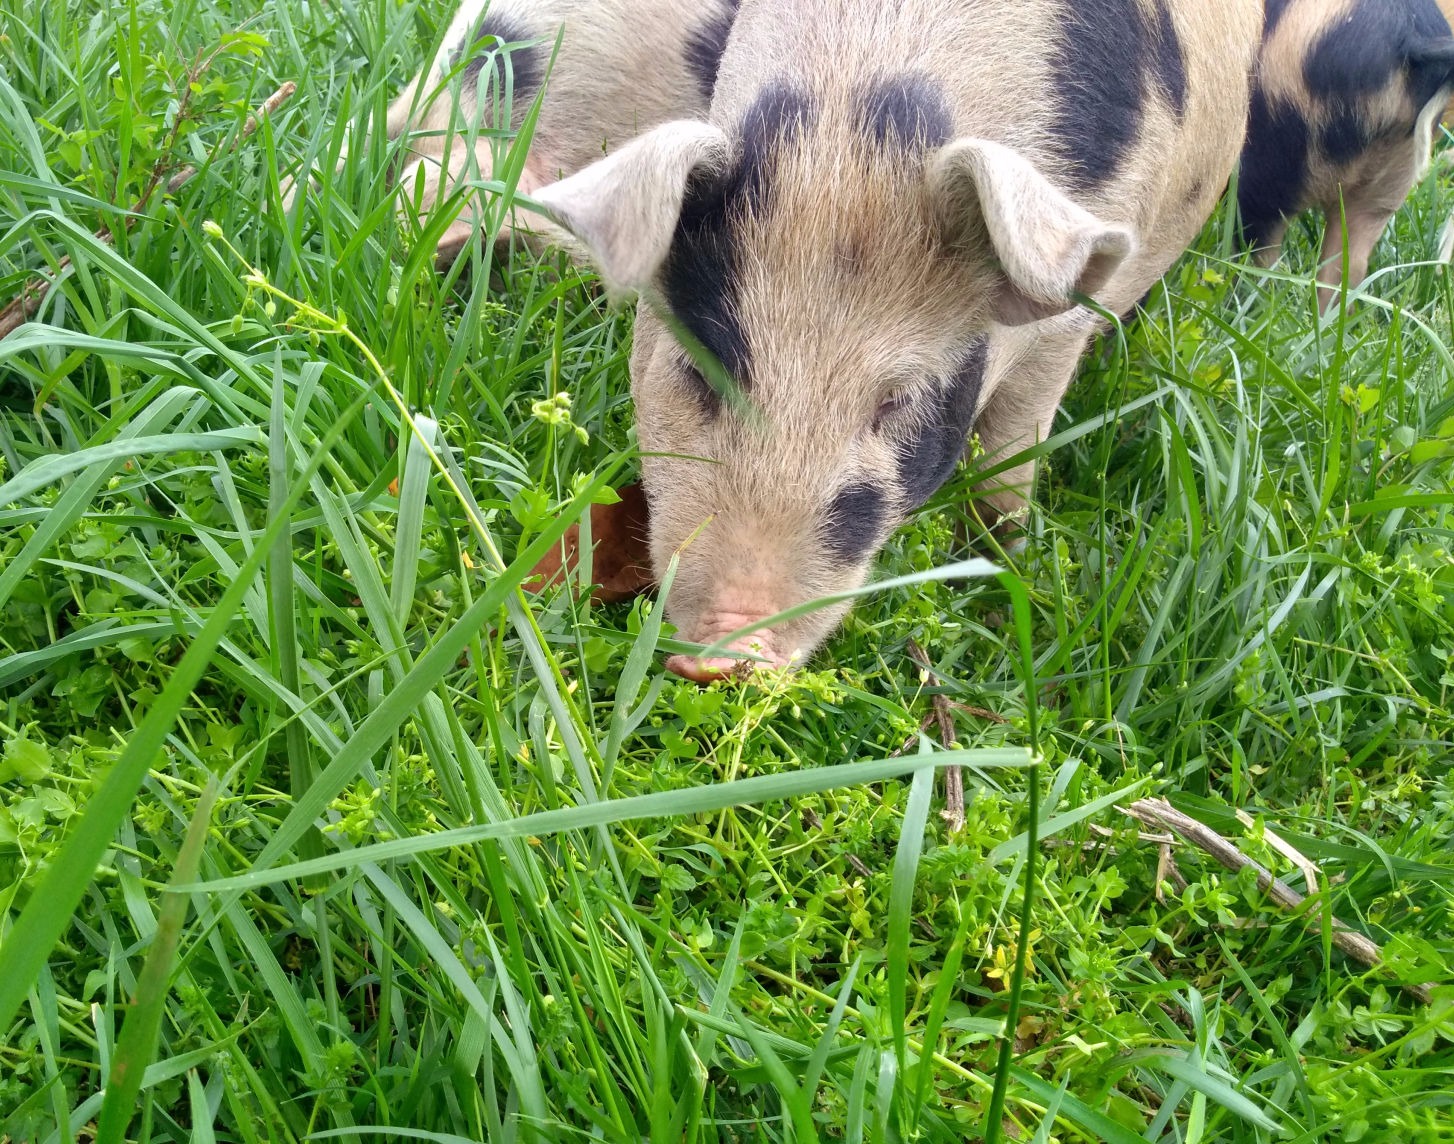 Spotted heritage pigs eating clover and grasses at our ranch in VA